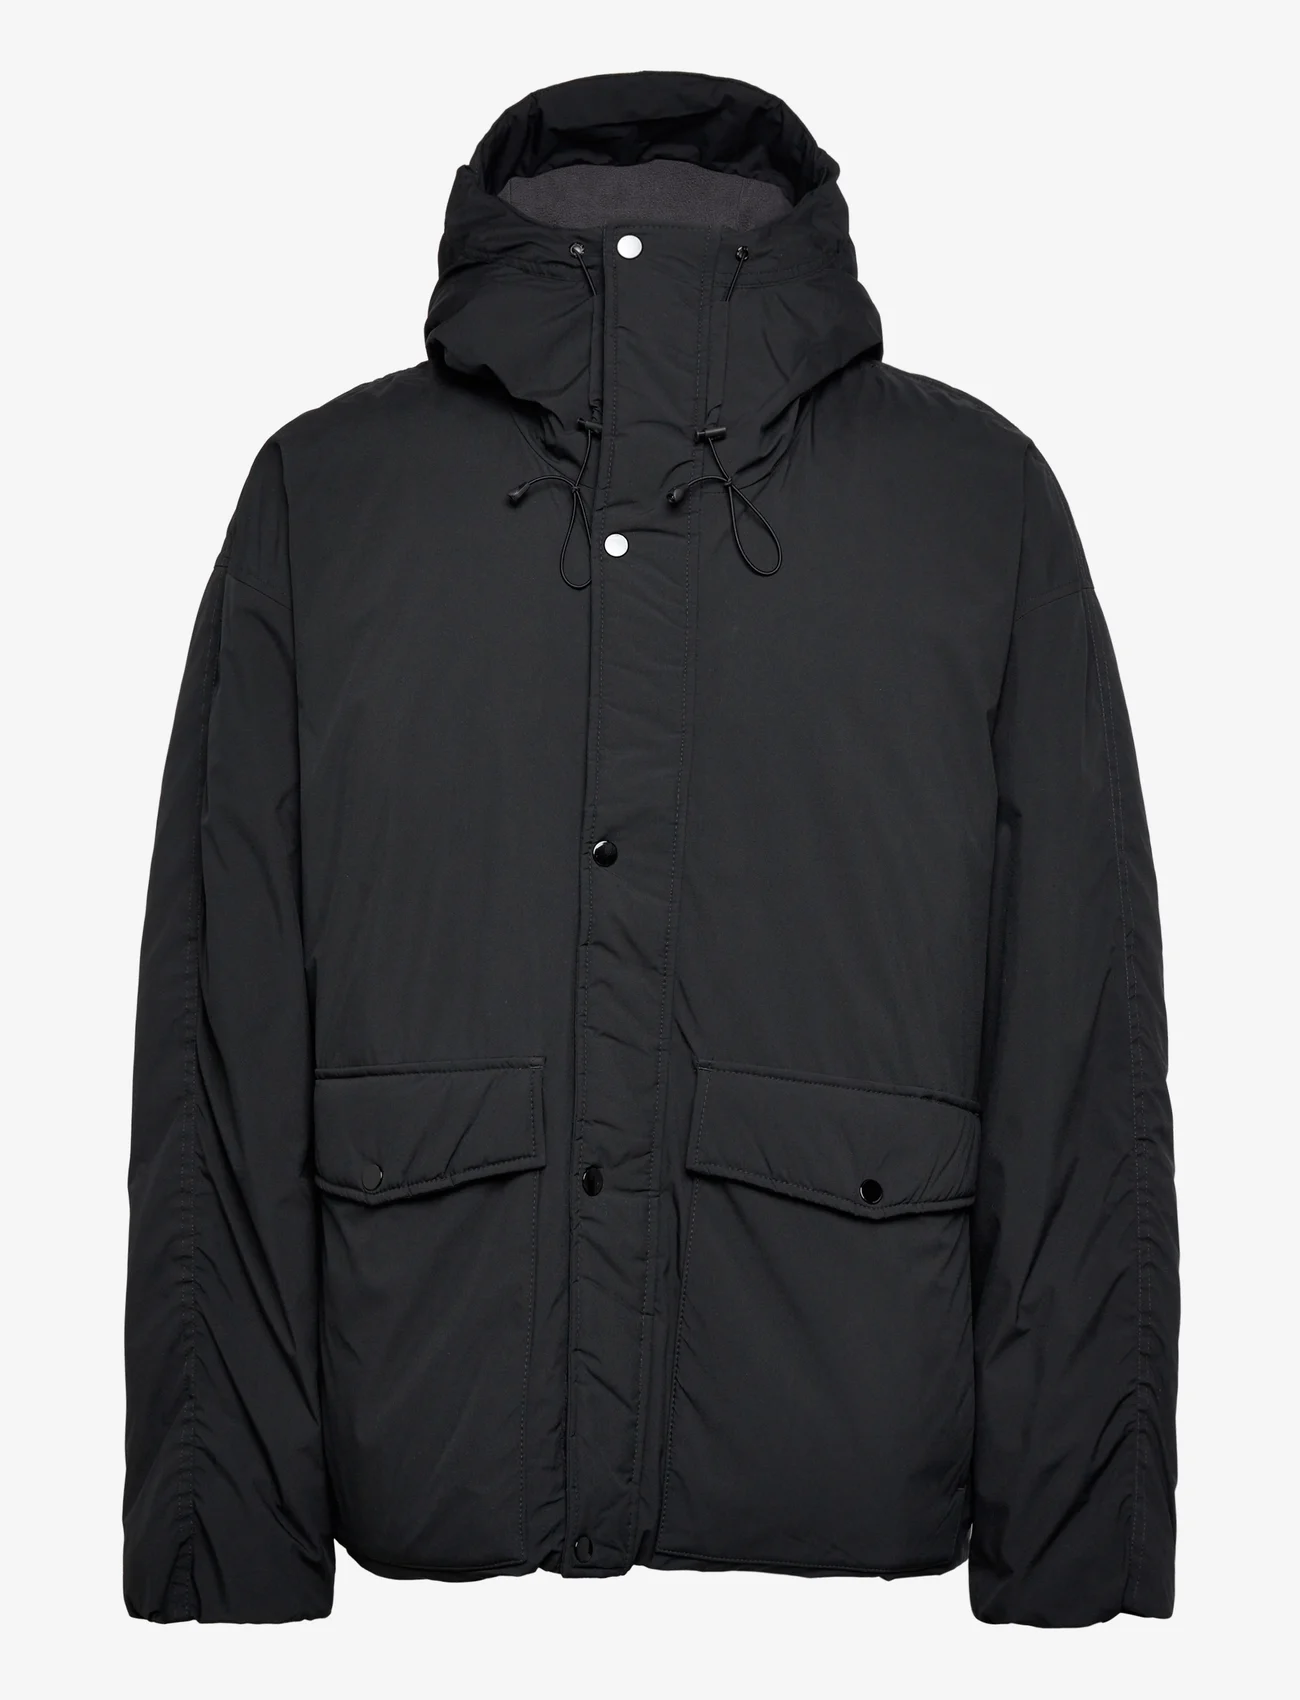 Abercrombie & Fitch - ANF MENS OUTERWEAR - talvitakit - black - 0